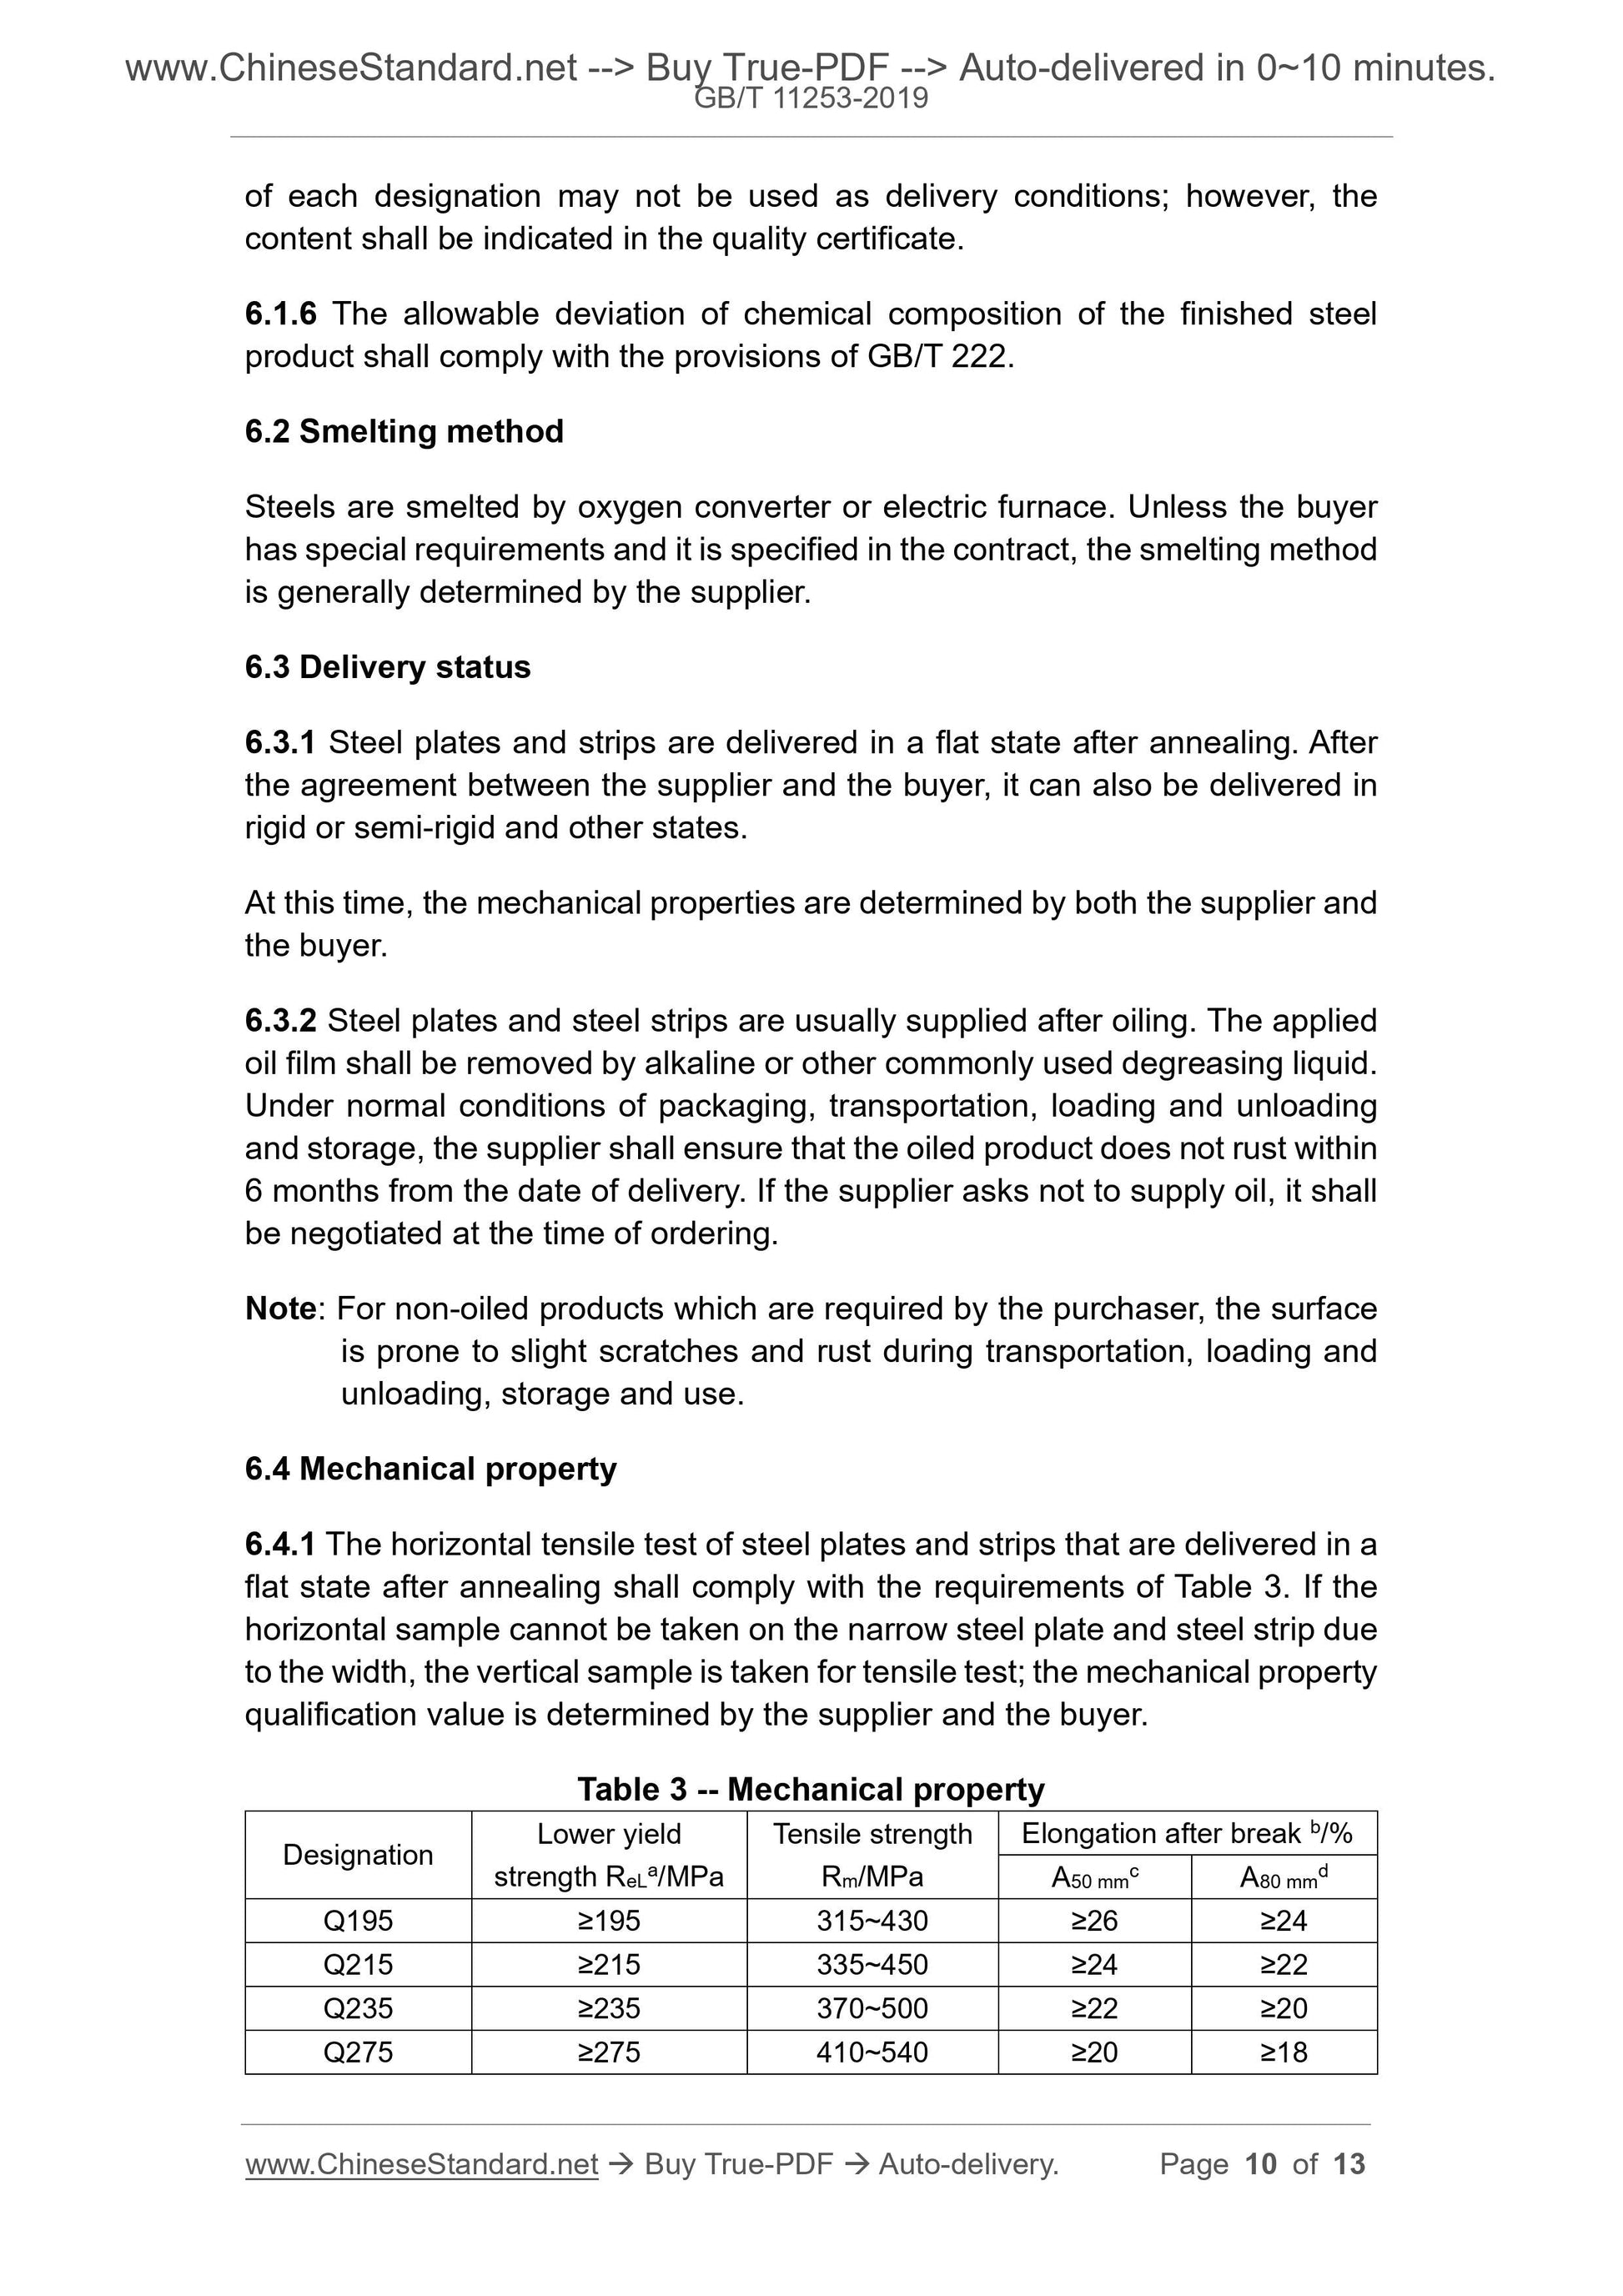 GB/T 11253-2019 Page 6